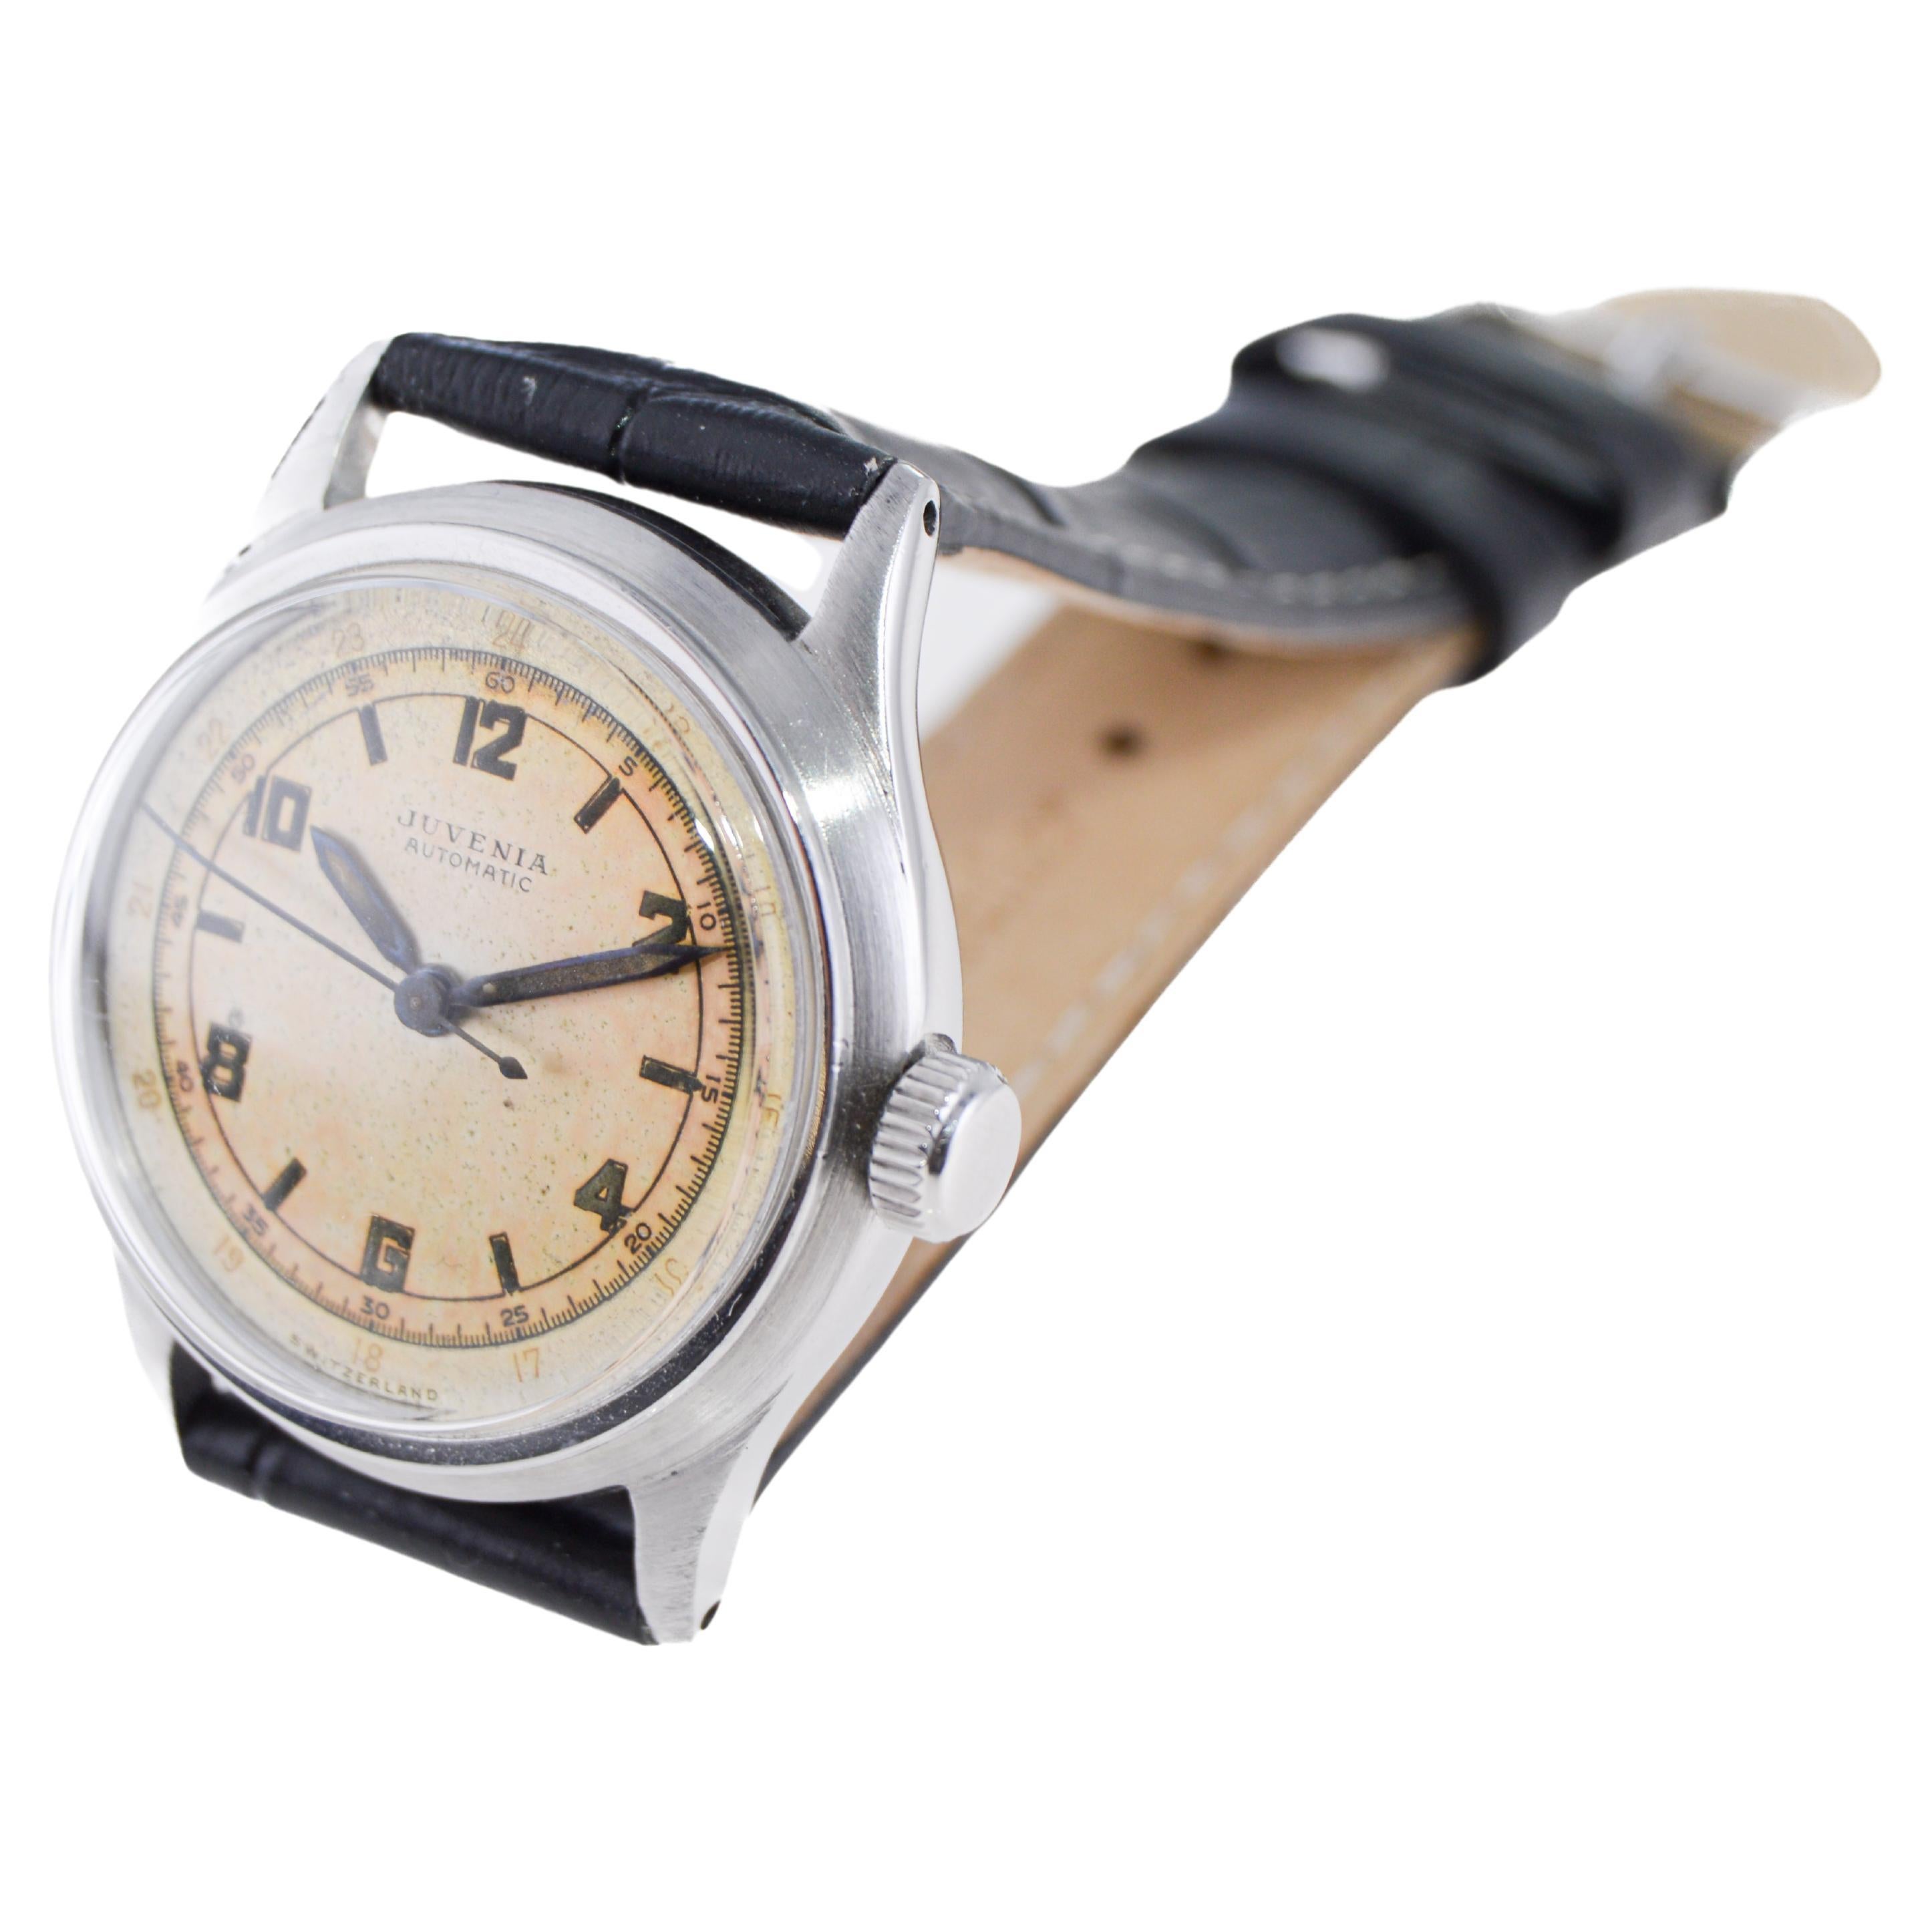 Juvenia Early Stainless Steel Automatic Wristwatch, circa 1930s In Excellent Condition For Sale In Long Beach, CA